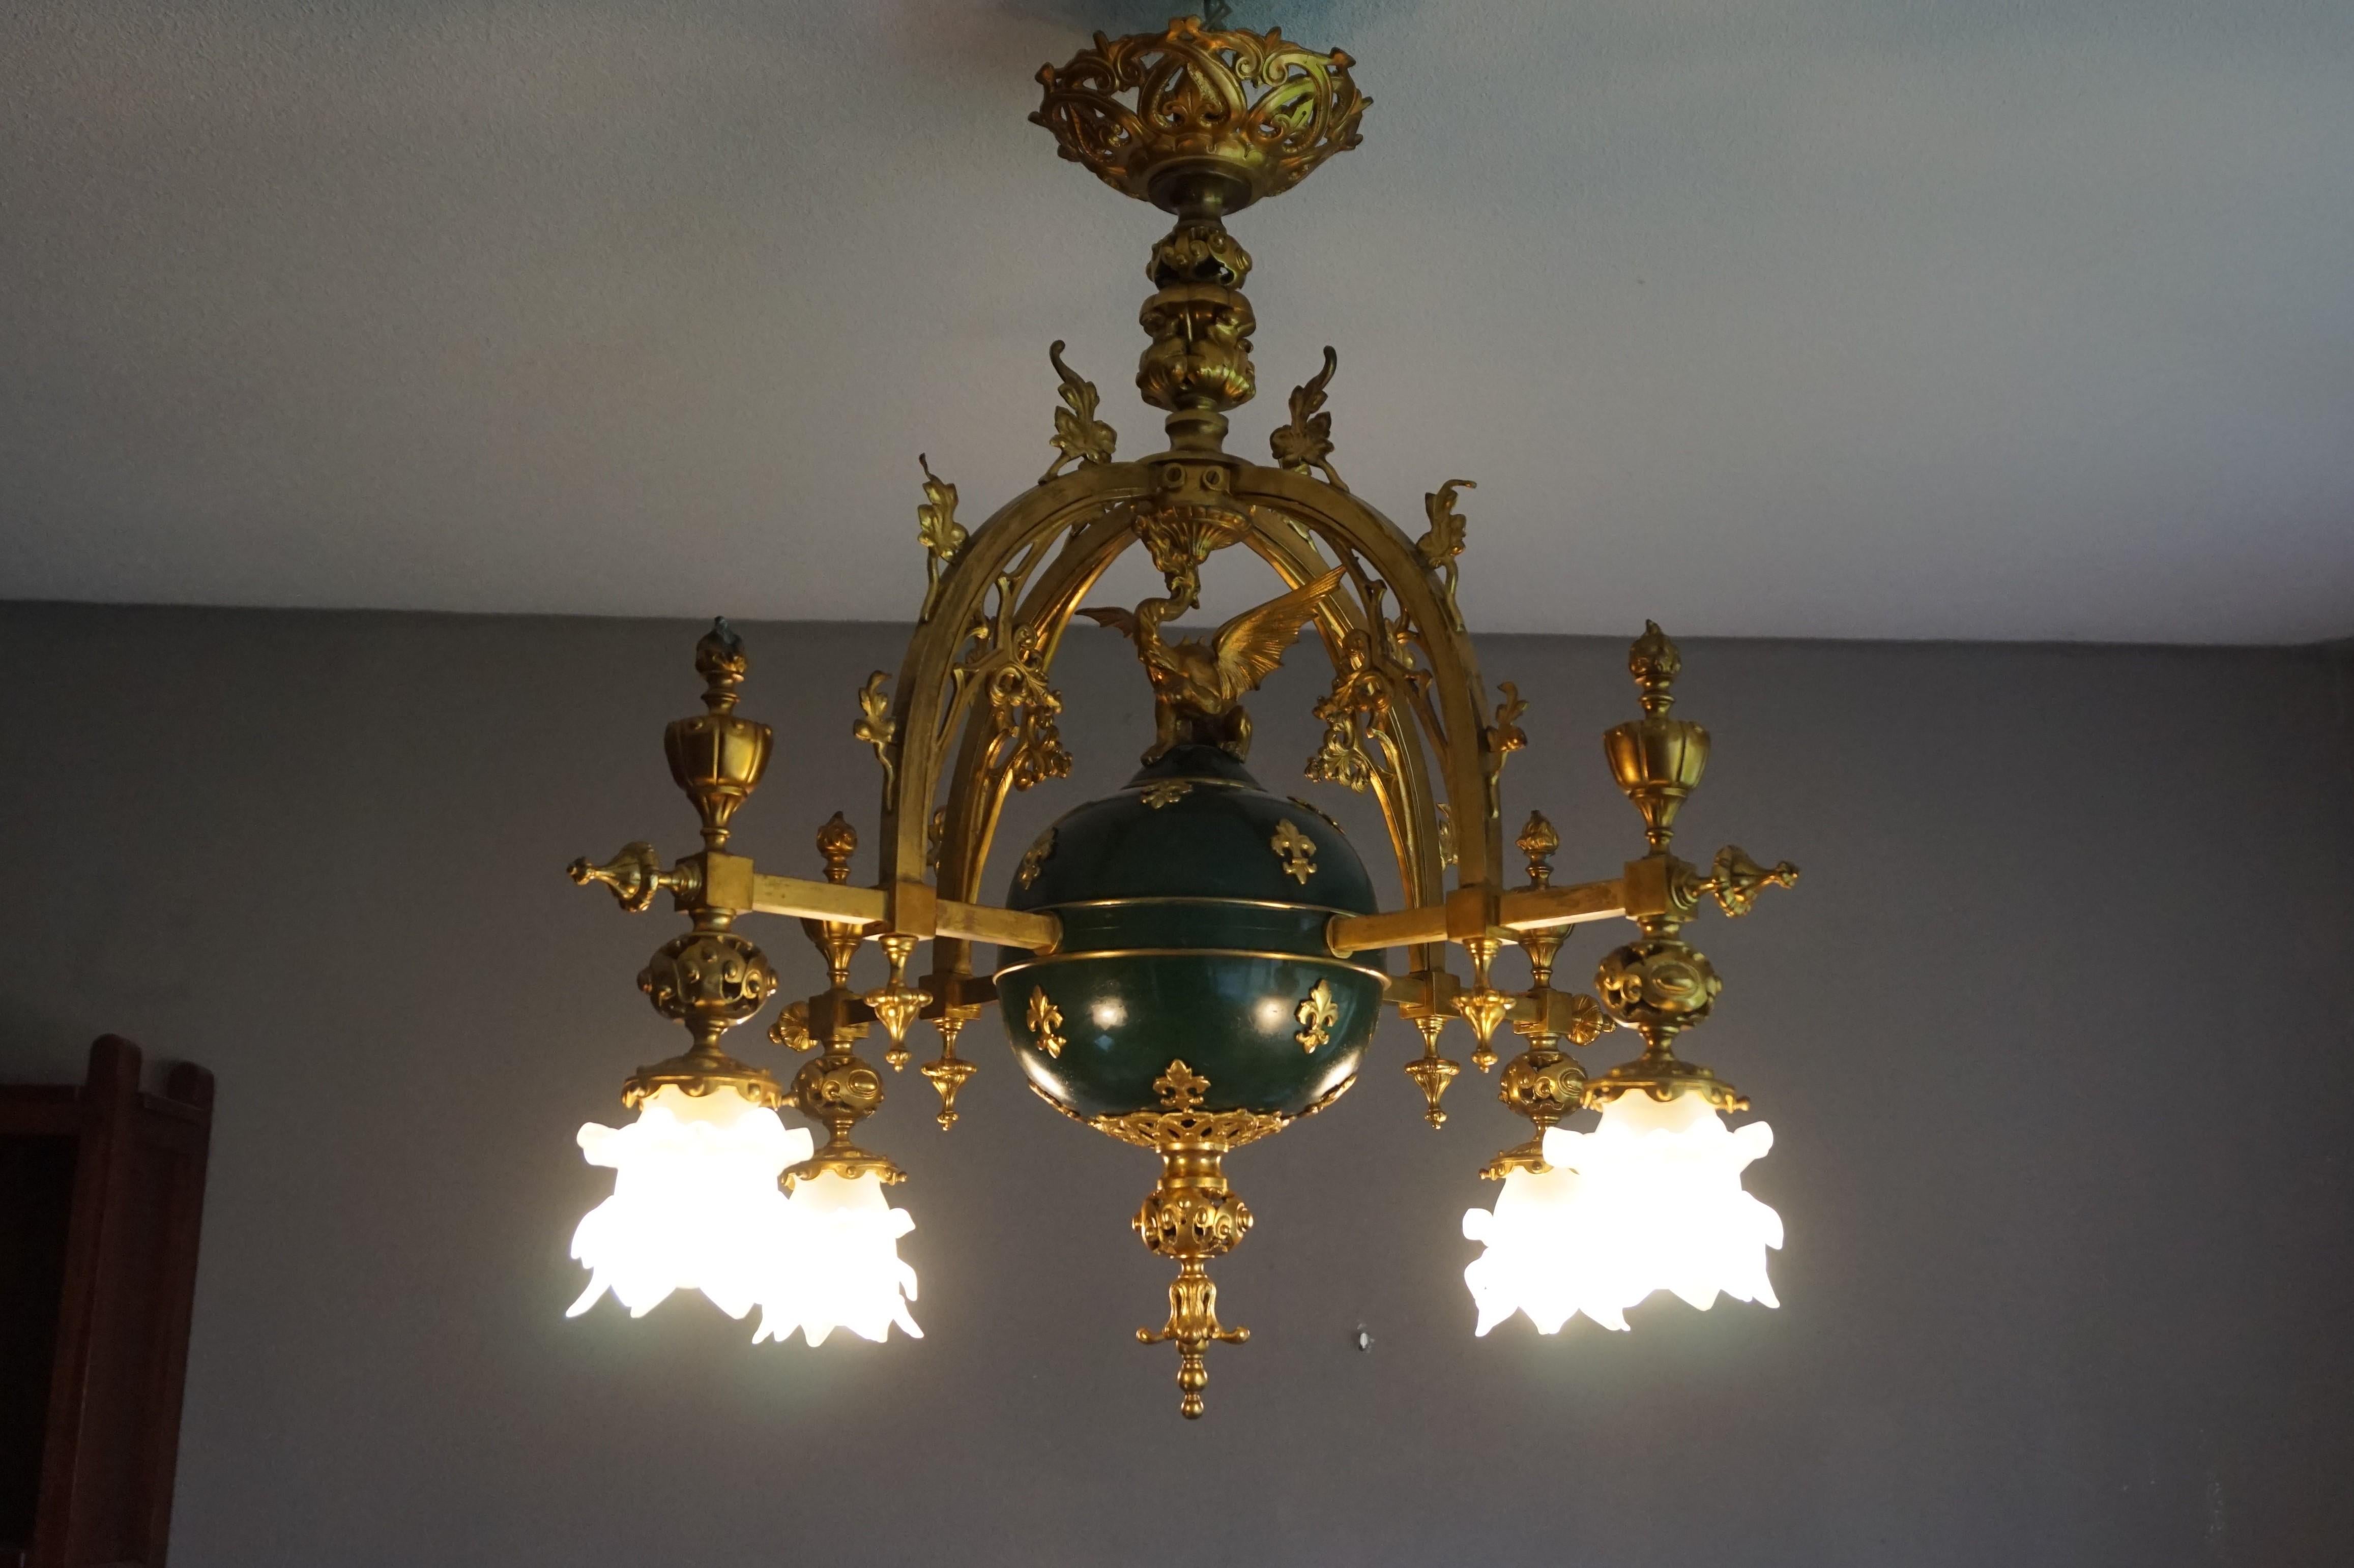 Stunning Gilt Bronze Gothic Revival Chandelier w. Dragon Sculpture & Glass Shade For Sale 10